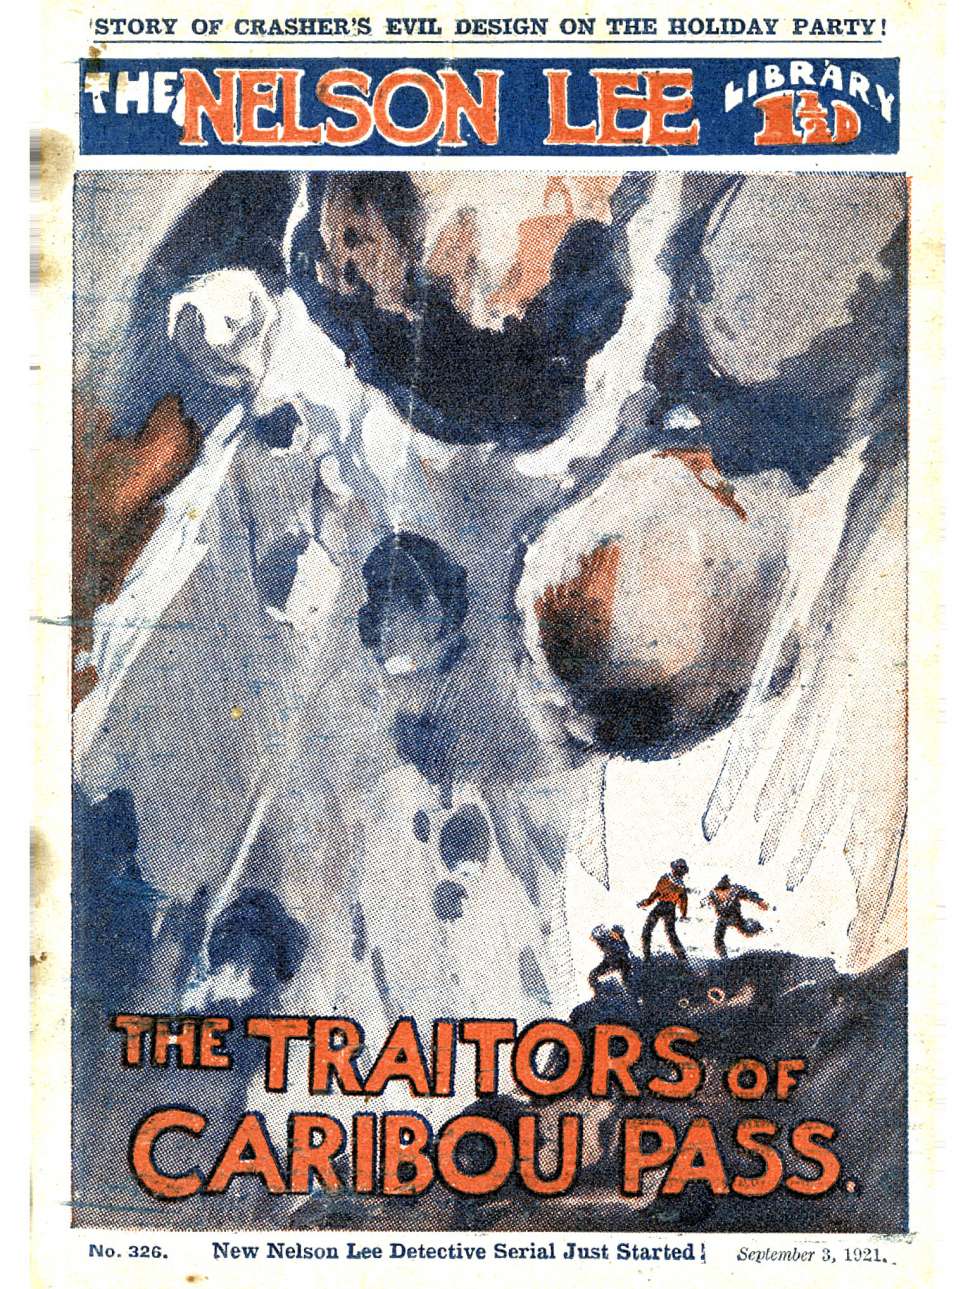 Book Cover For Nelson Lee Library s1 326 - The Traitors of Caribou Pass